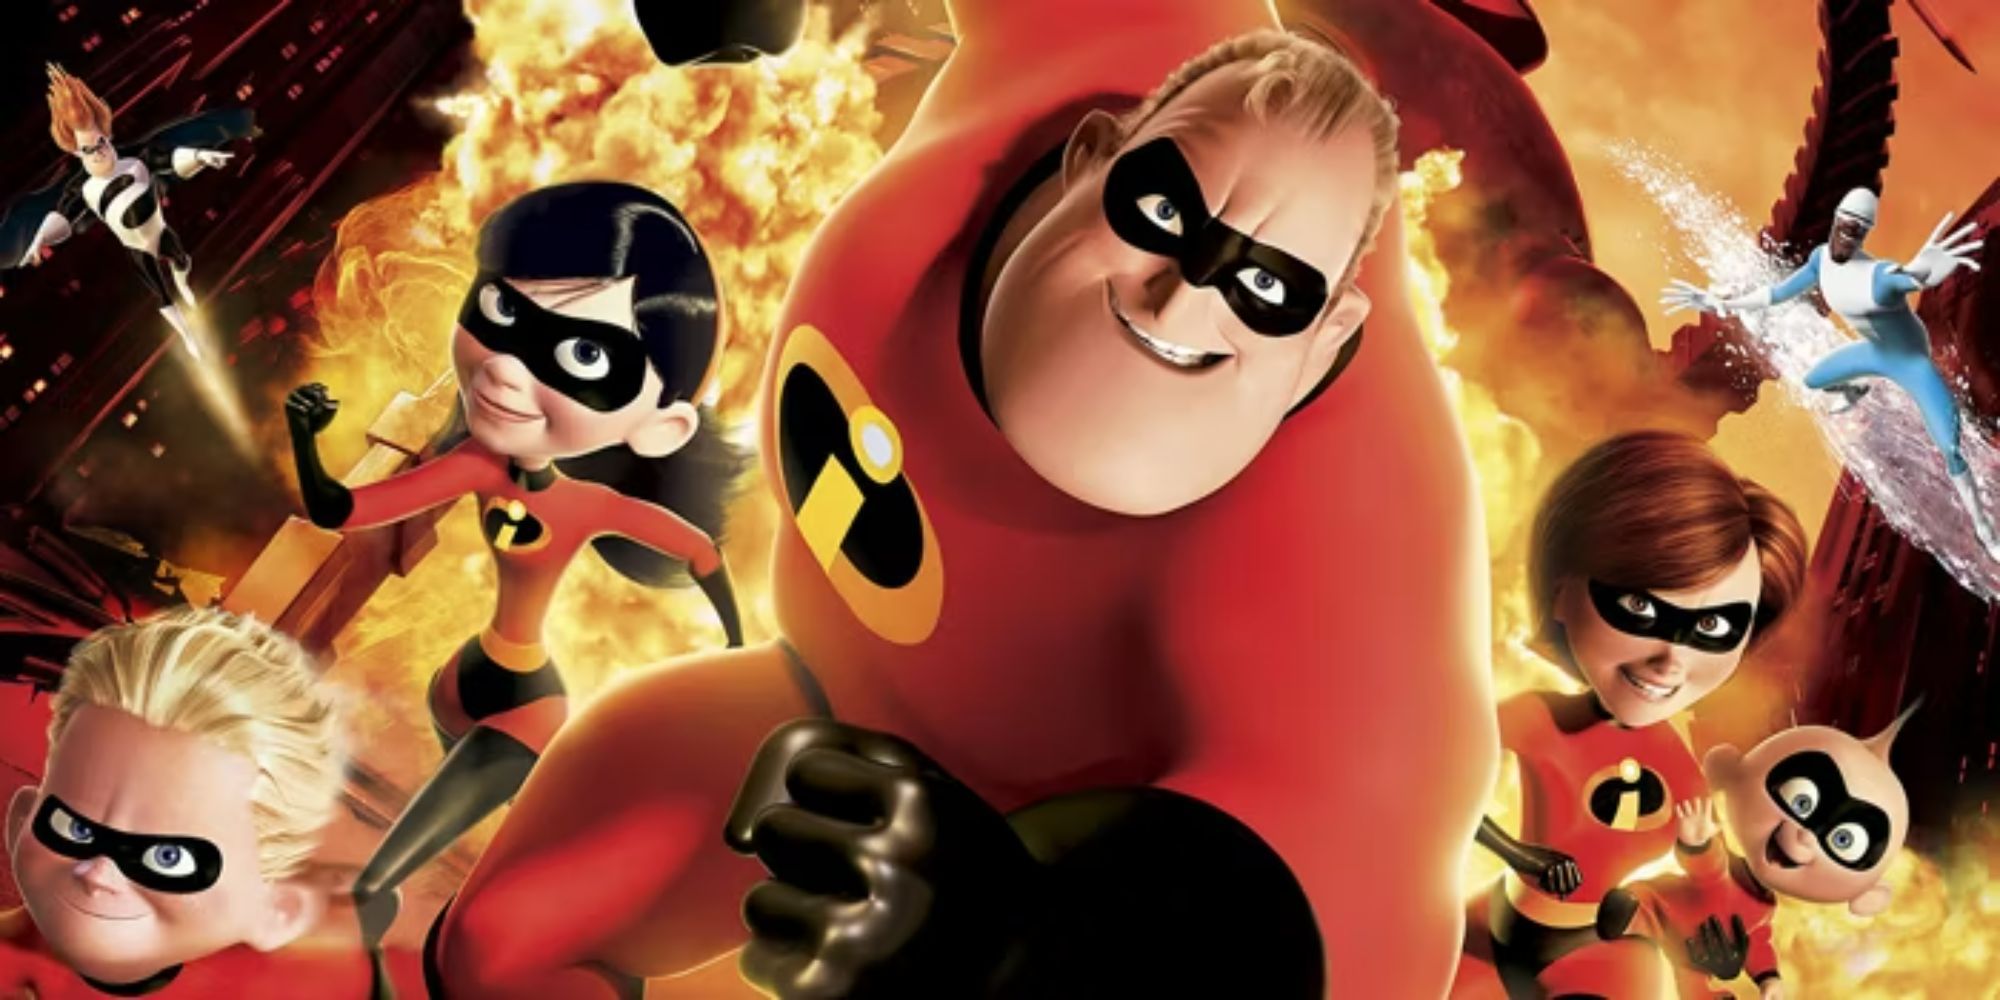 The Incredibles run from a fireball in the movie's poster